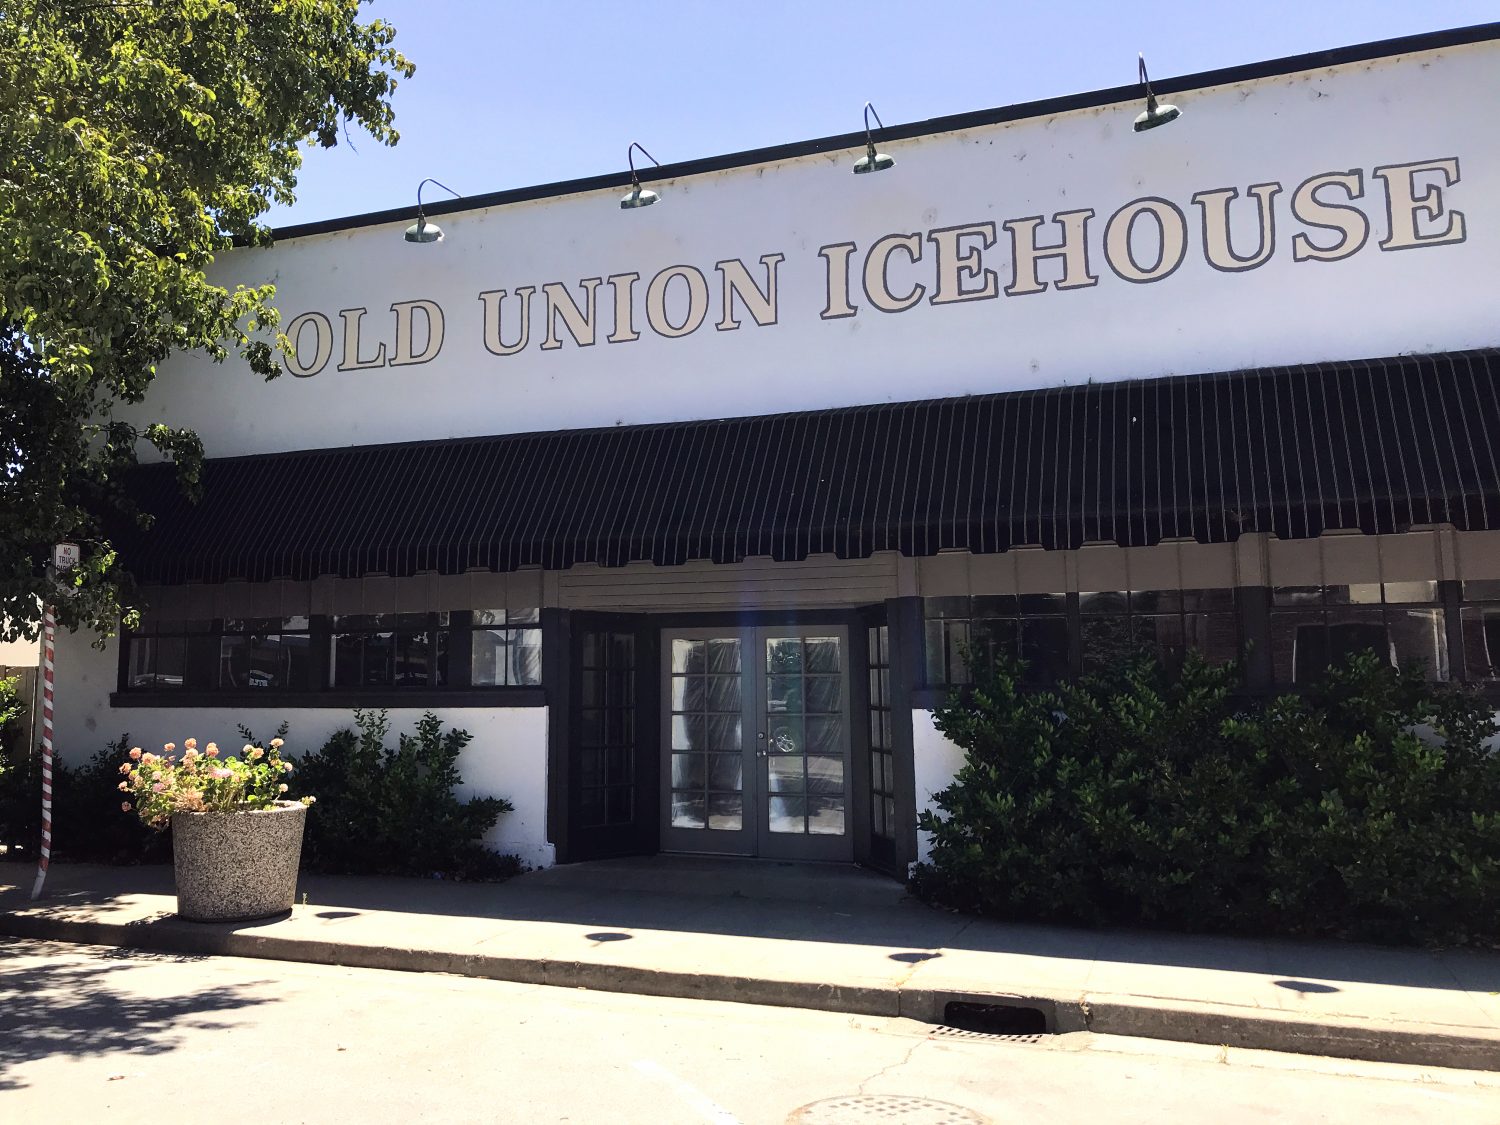 Old Union Icehouse historical building in Isleton